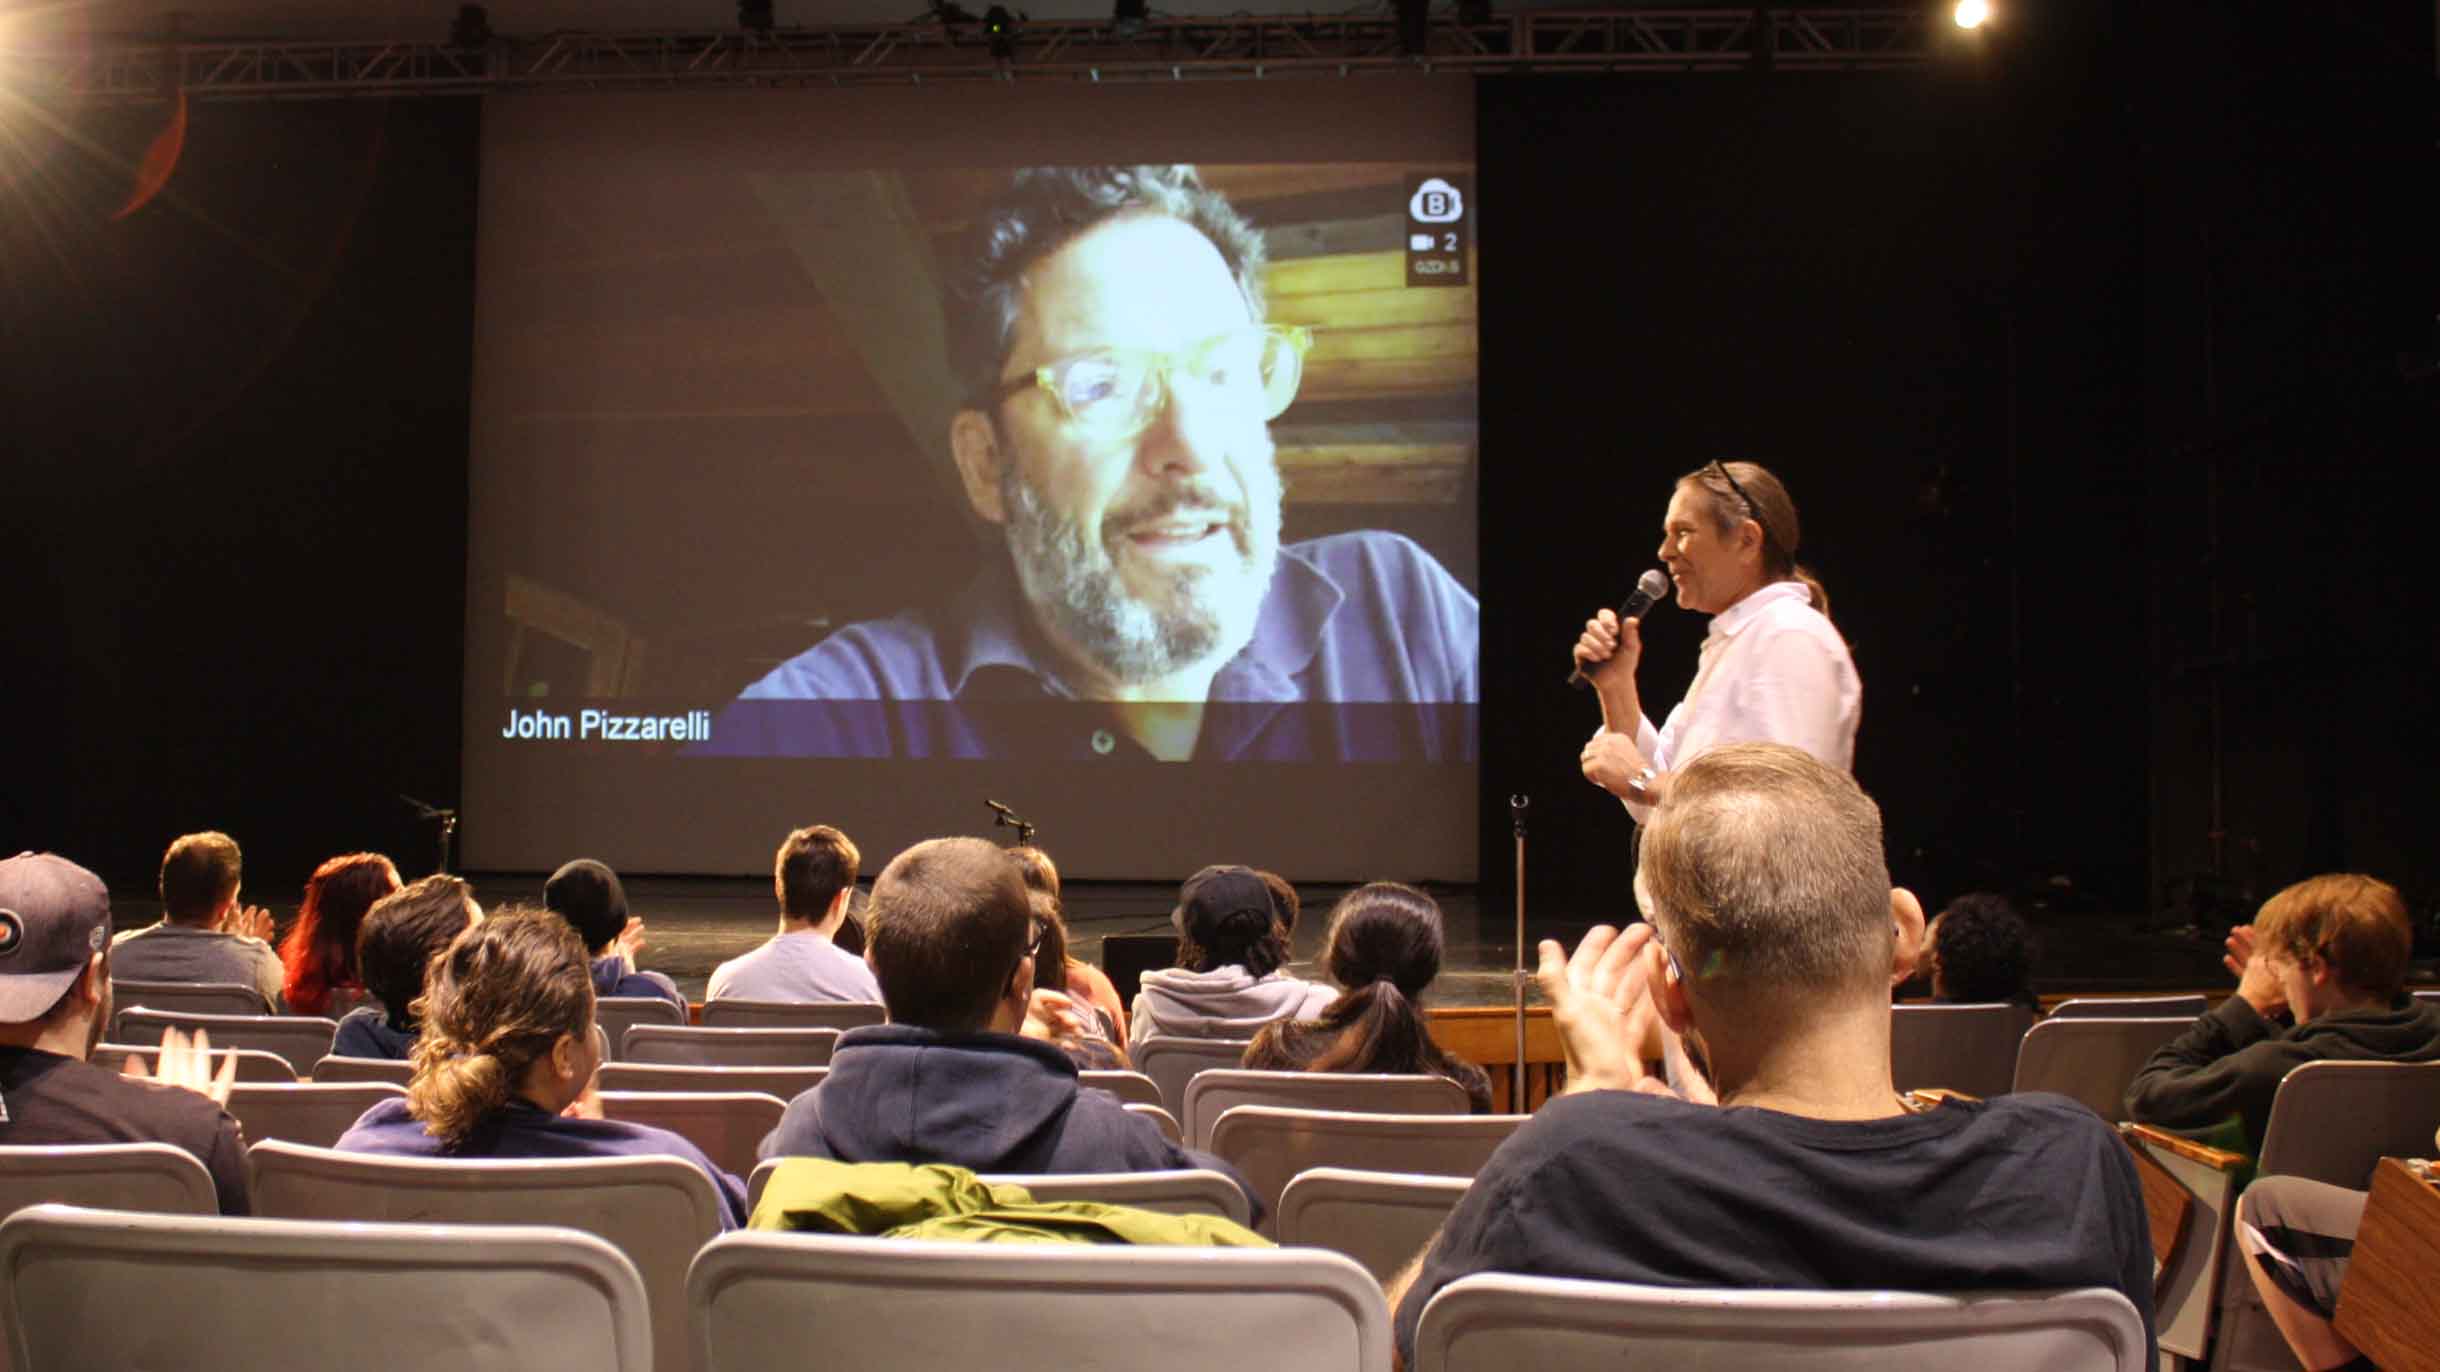 Students from the Sound Recording & Music Technology Program learned more about the business of creating and producing music during a conversation with jazz artist John Pizzarelli.